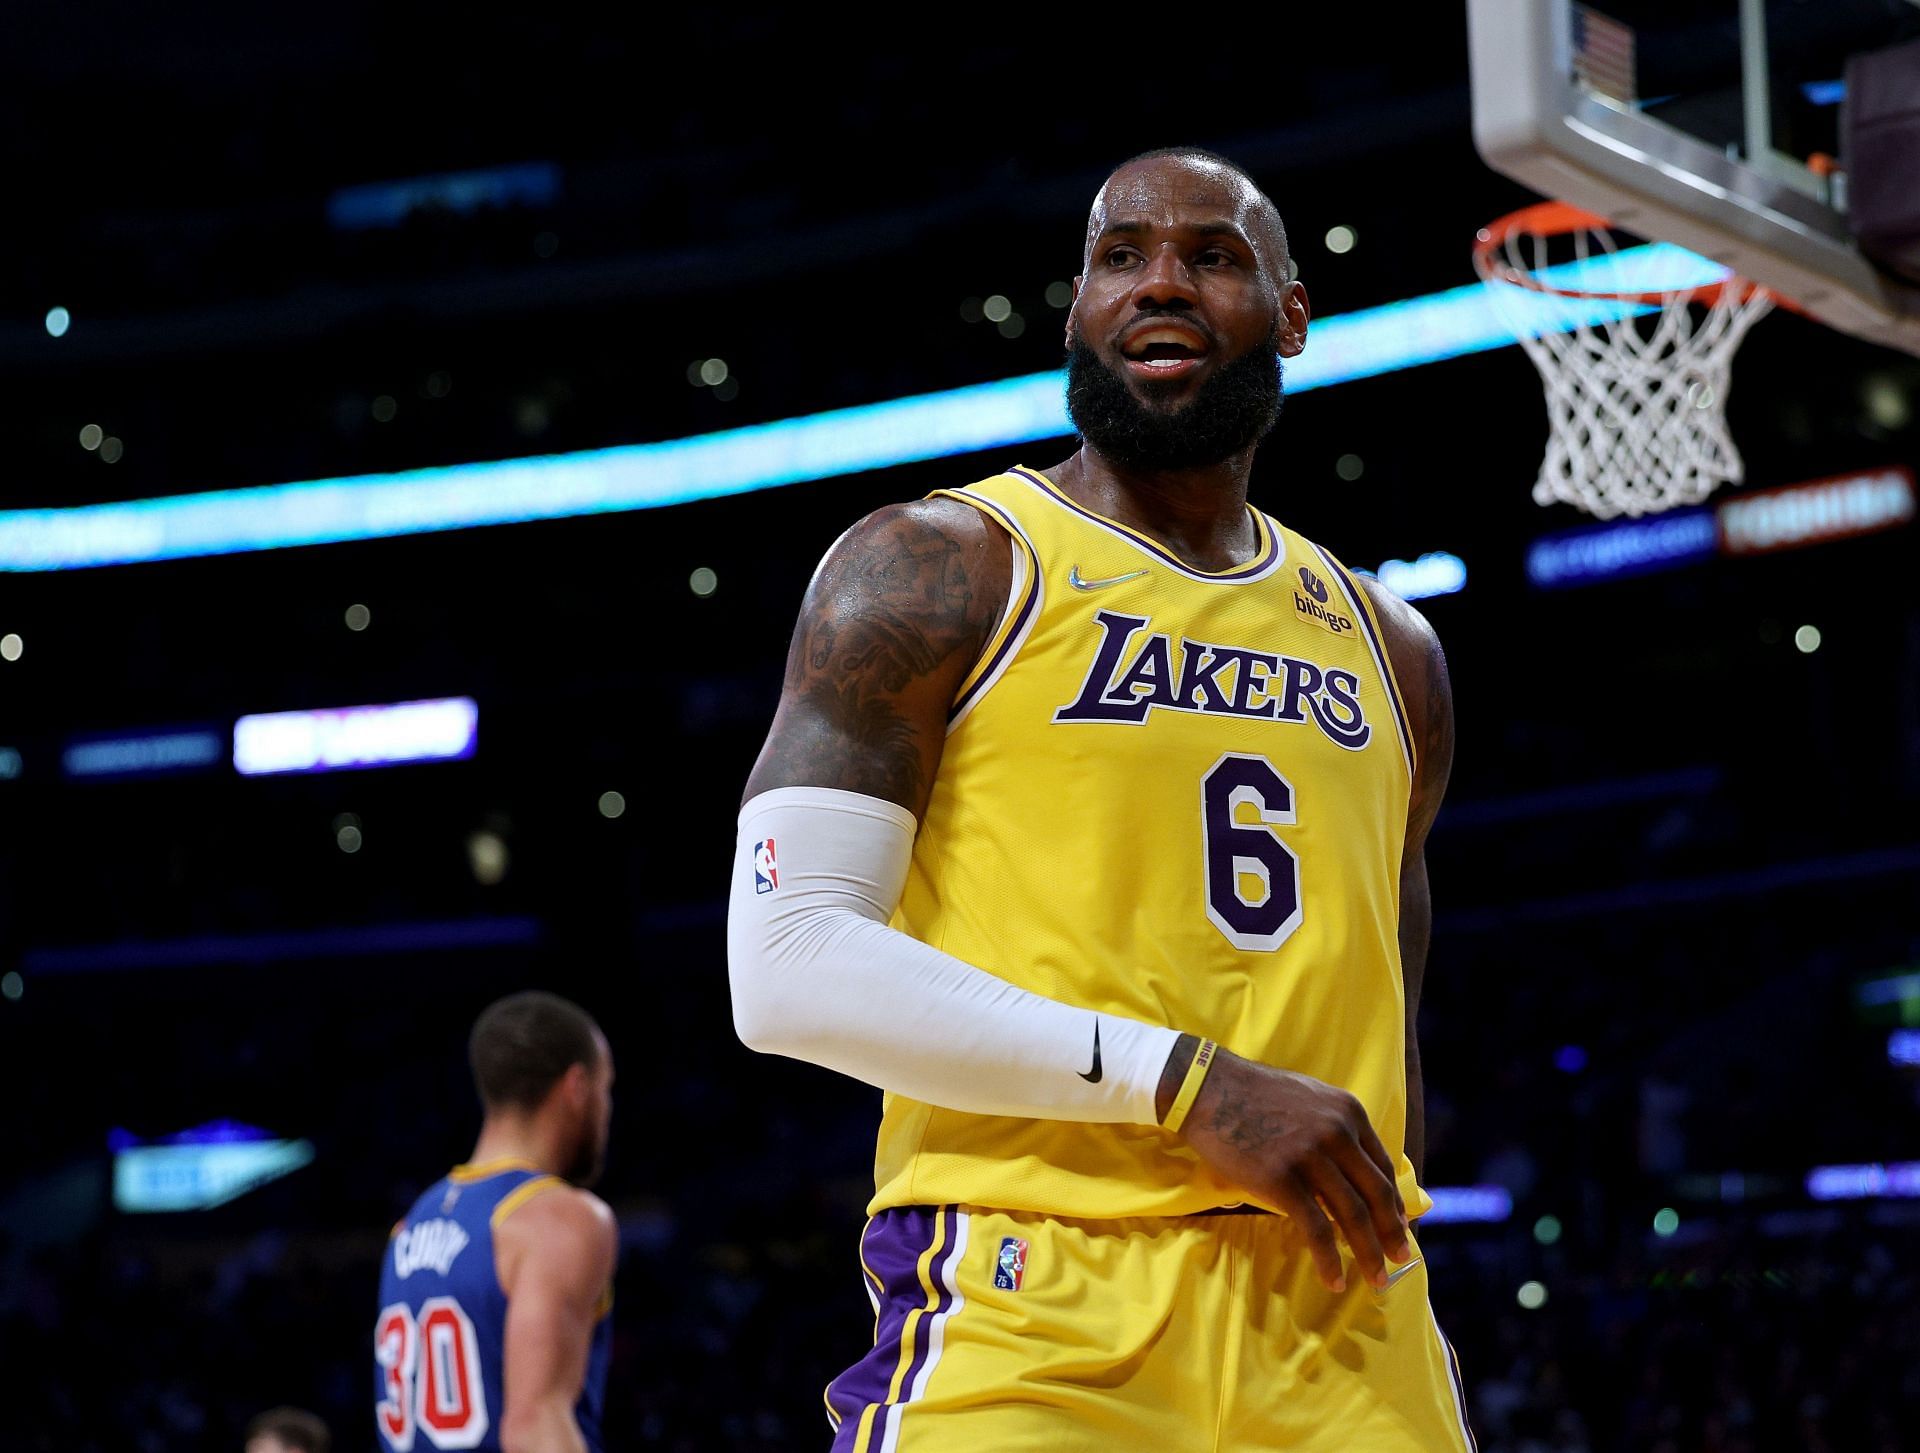 LeBron James of the LA Lakers reacts after his basket and a Golden State Warriors foul during a 124-116 Lakers win on March 5 in Los Angeles, California.